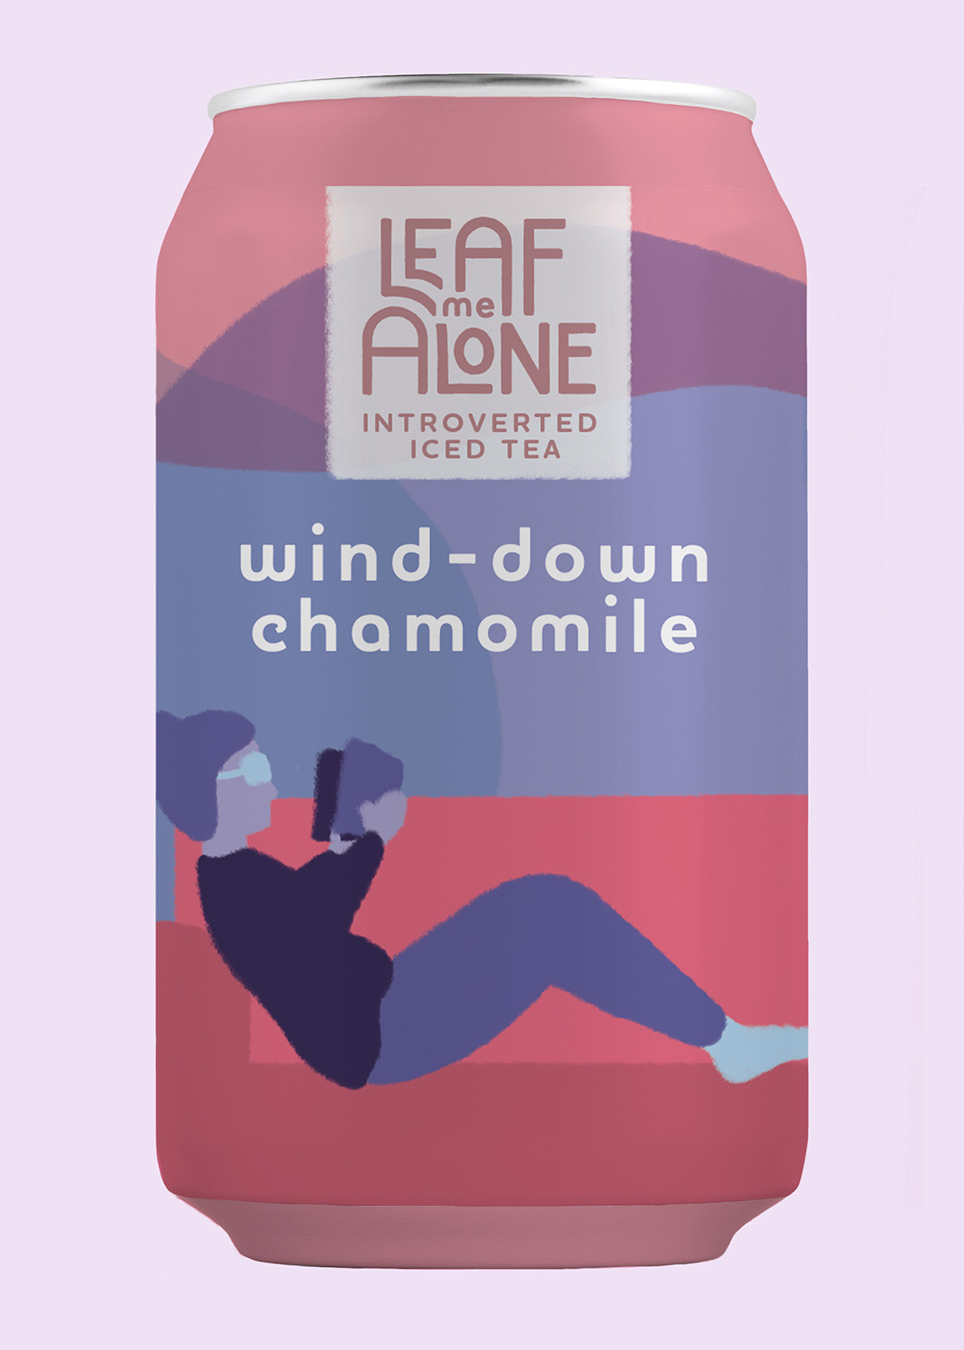 Mockup of an ice tea can from brand 'Leaf Me Alone'. The flavor is wind-down chamomile and the can is illustrated with a figure reading a book.